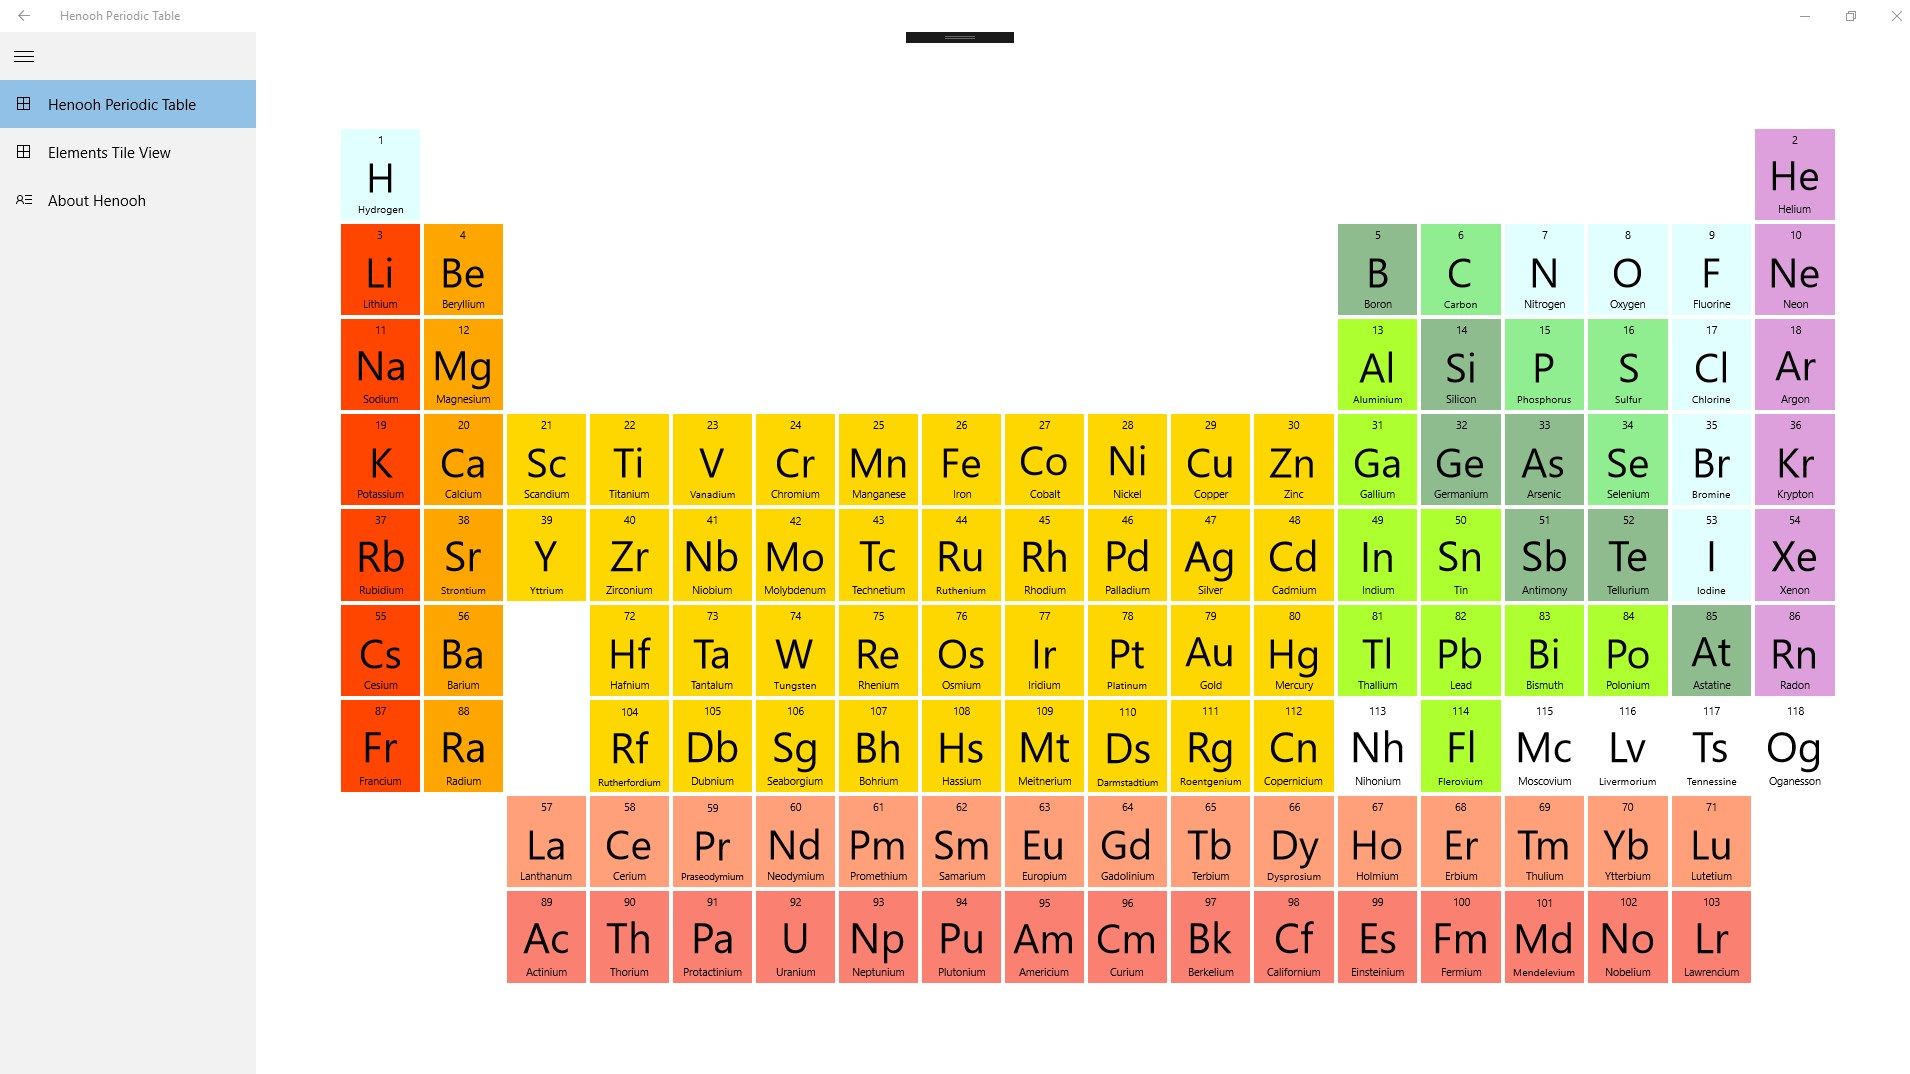 Periodic Table of Chemical Elements.